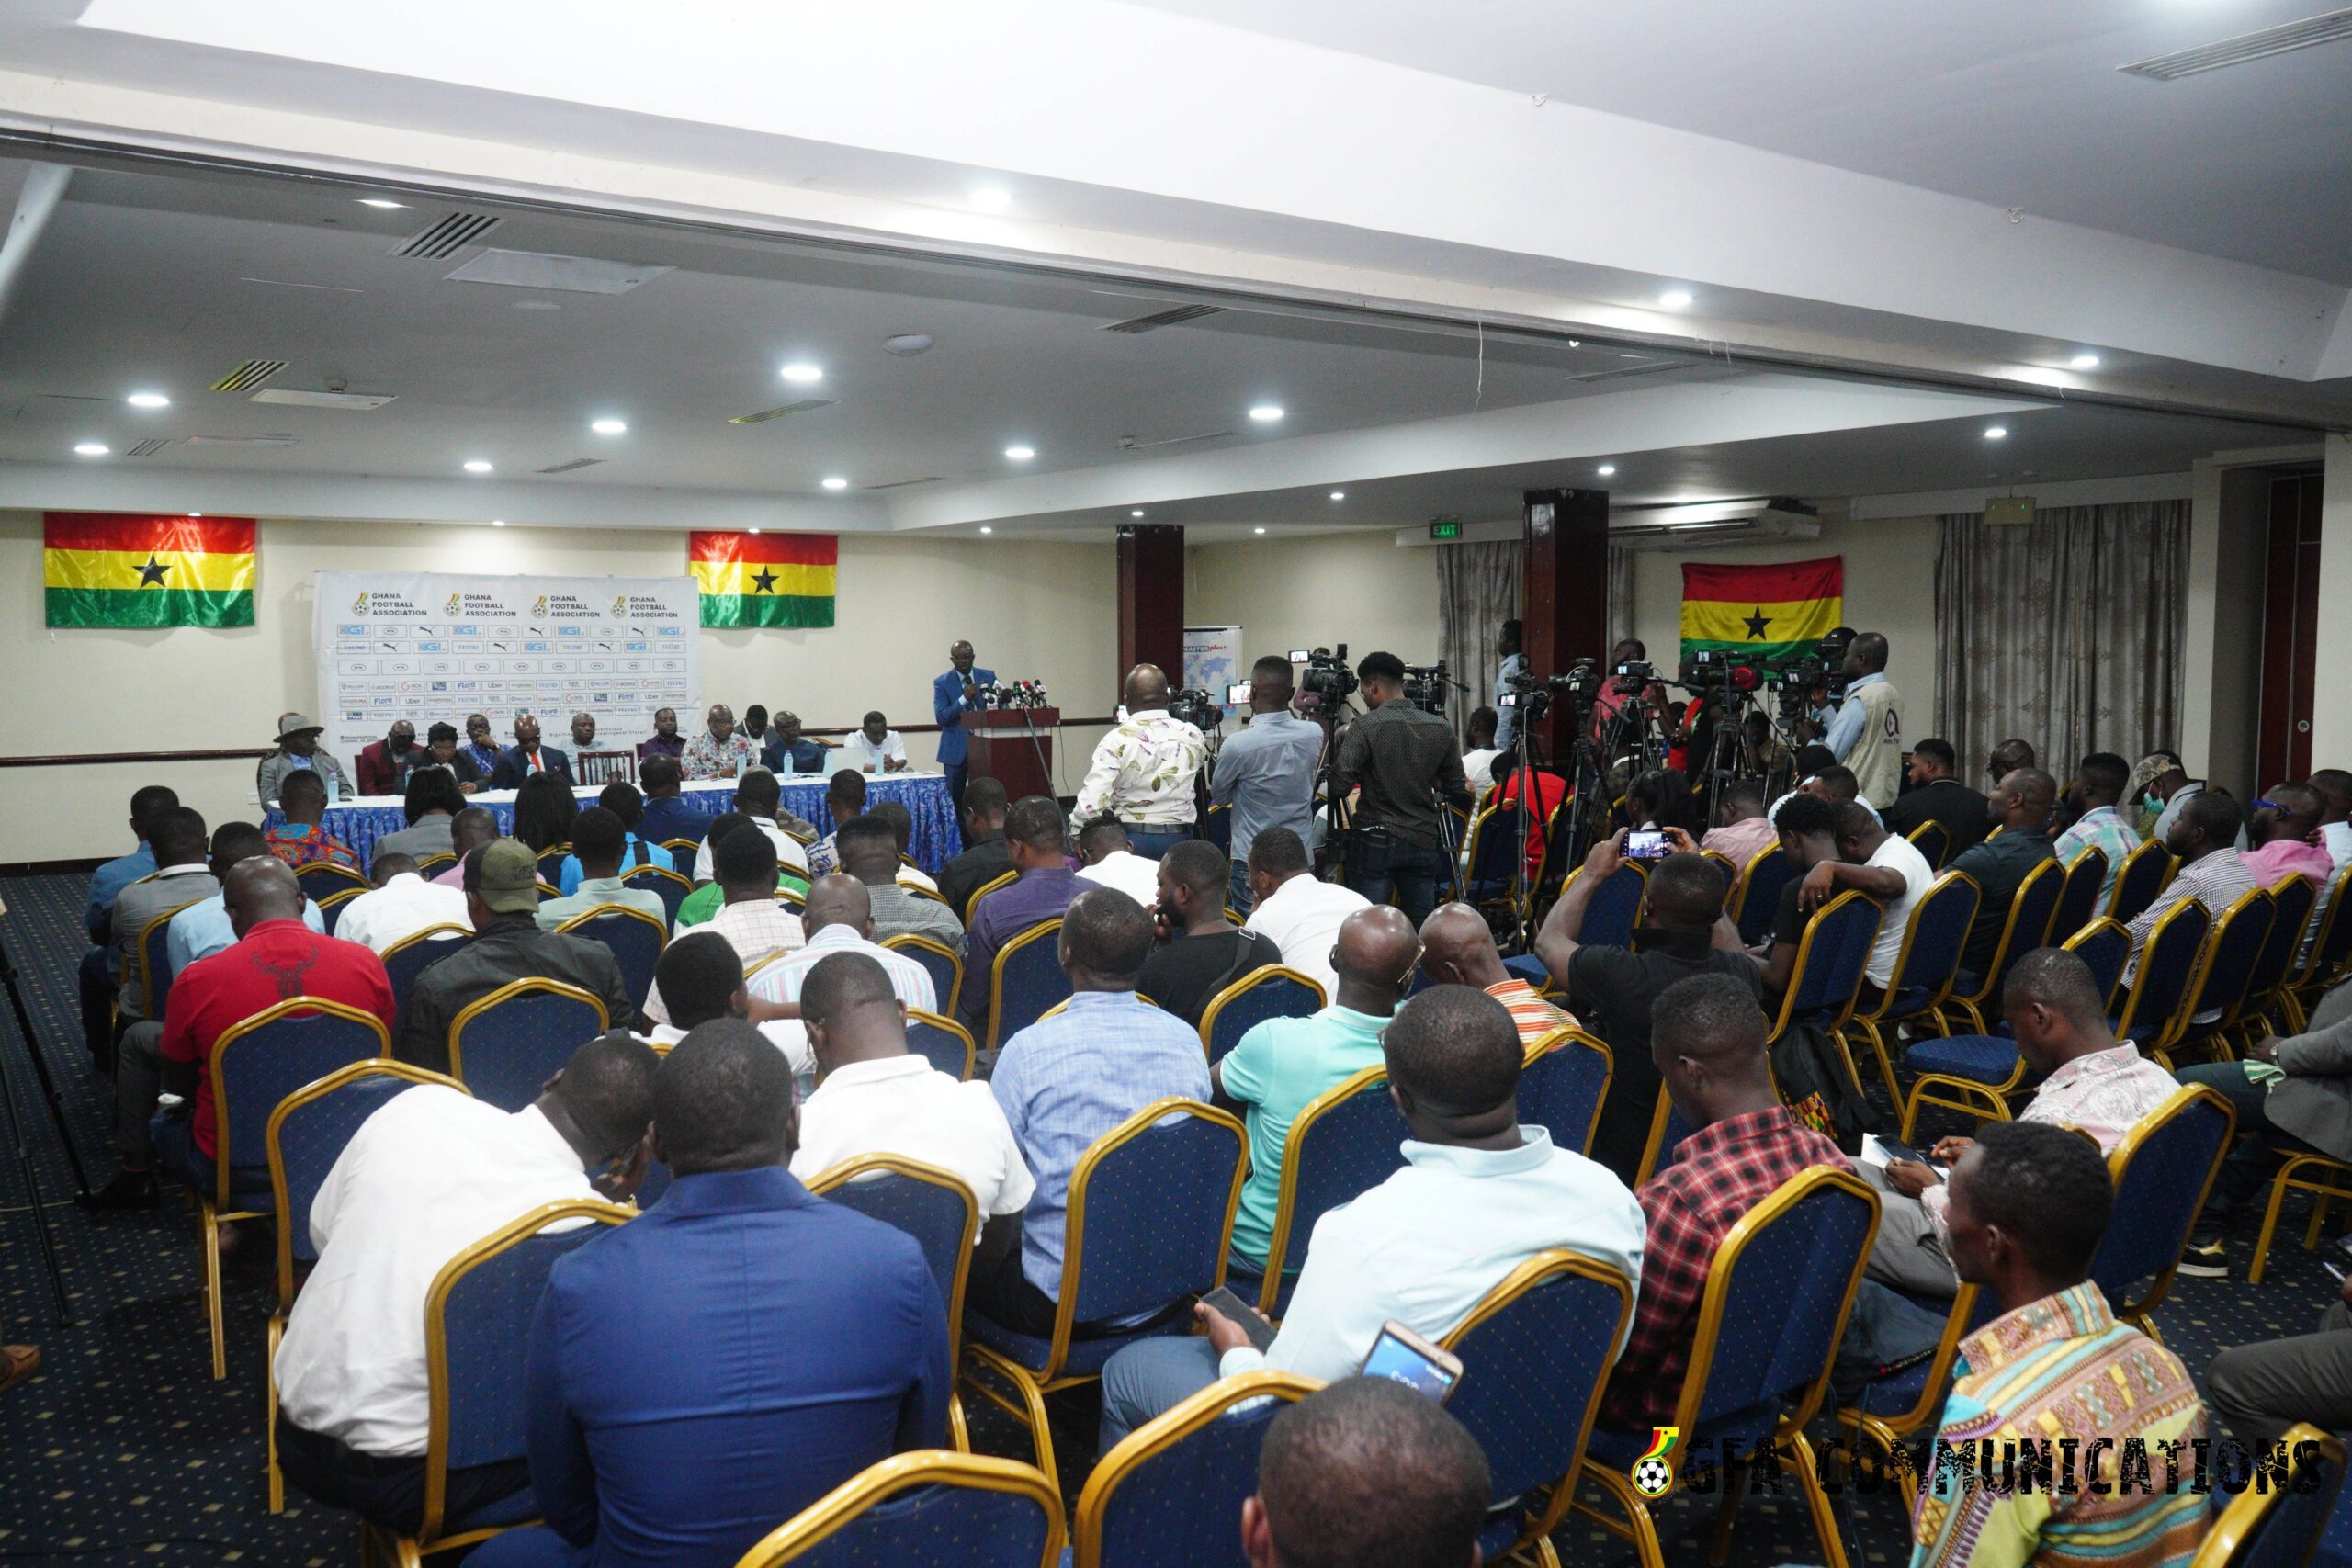 Check out pictures from the GFA’s meeting with the press in Kumasi